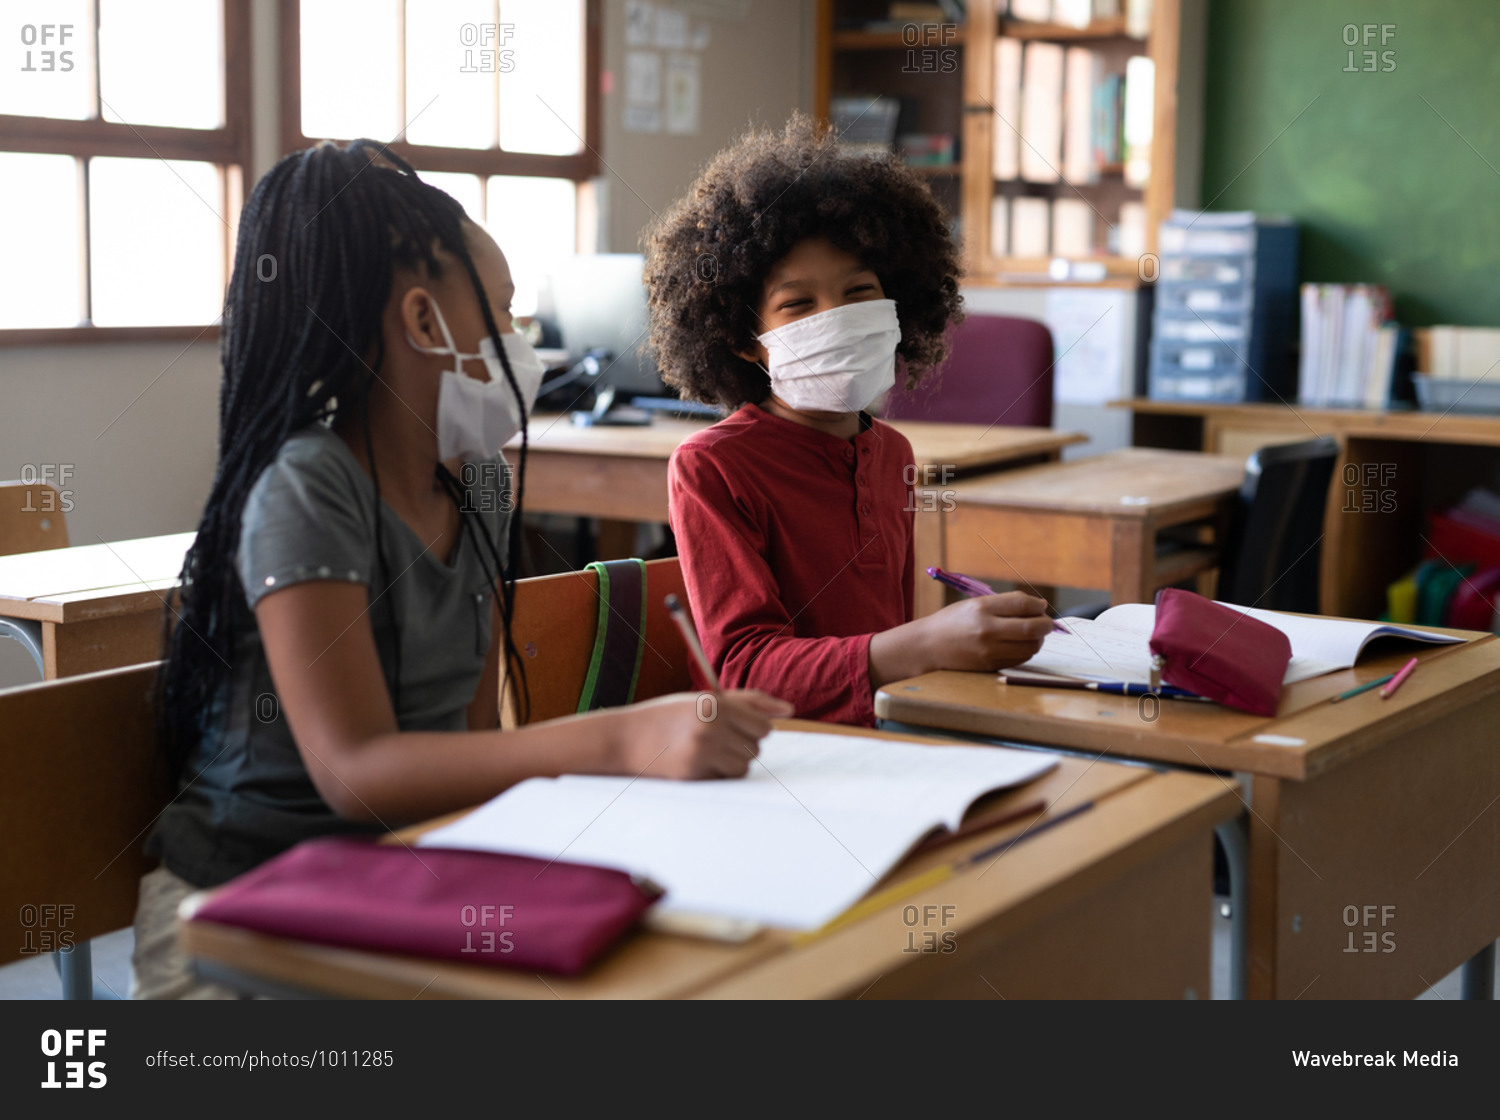 Multi ethnic boy and girl sitting at desks wearing face masks in classroom. Primary education social distancing health safety during Covid19 Coronavirus pandemic.